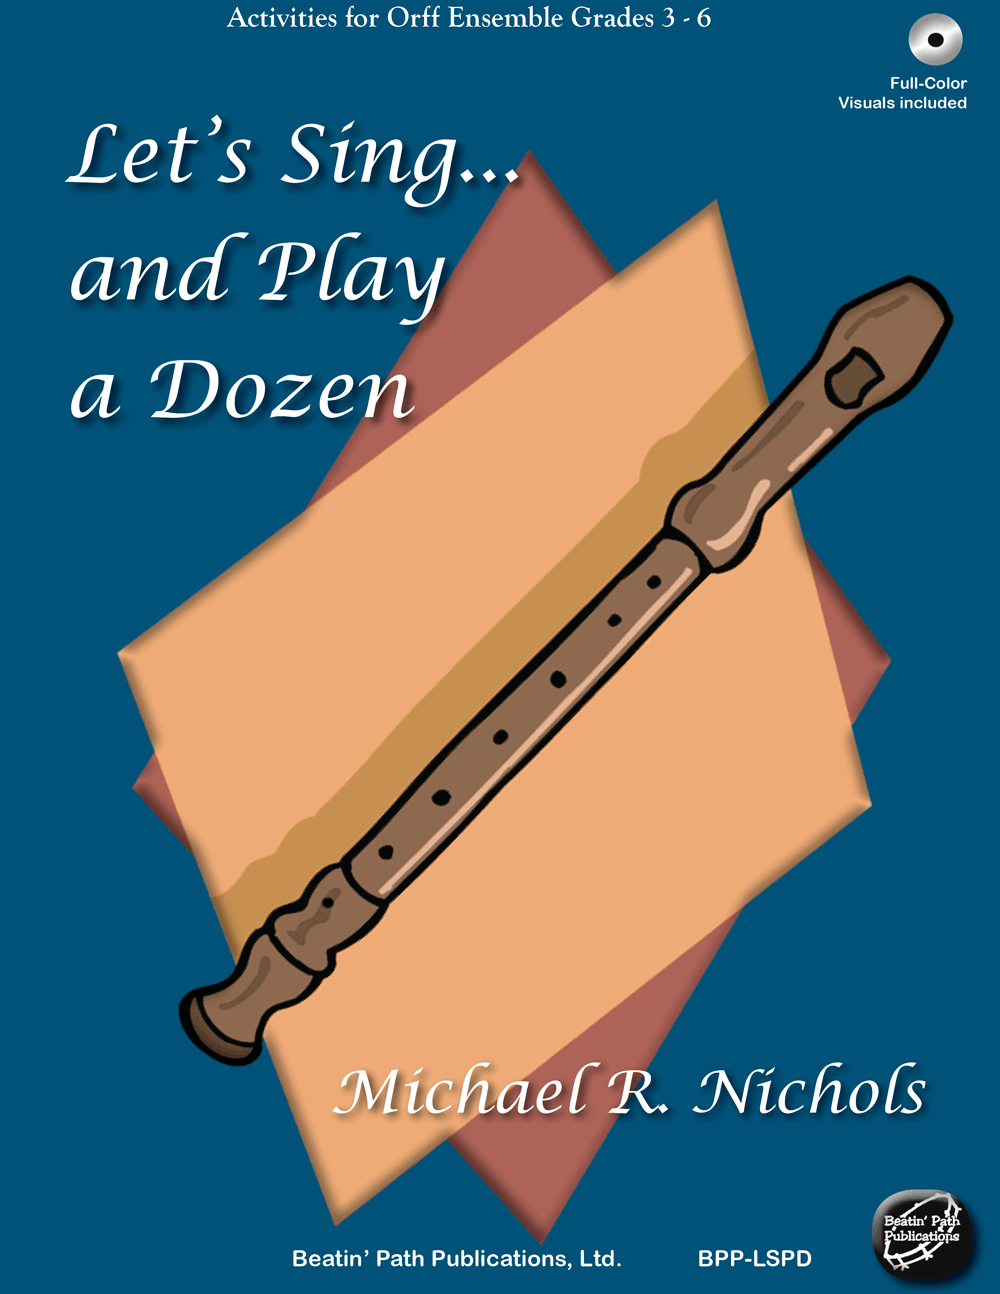 Let's Sing and Play a Dozen by Michael R. Nichols